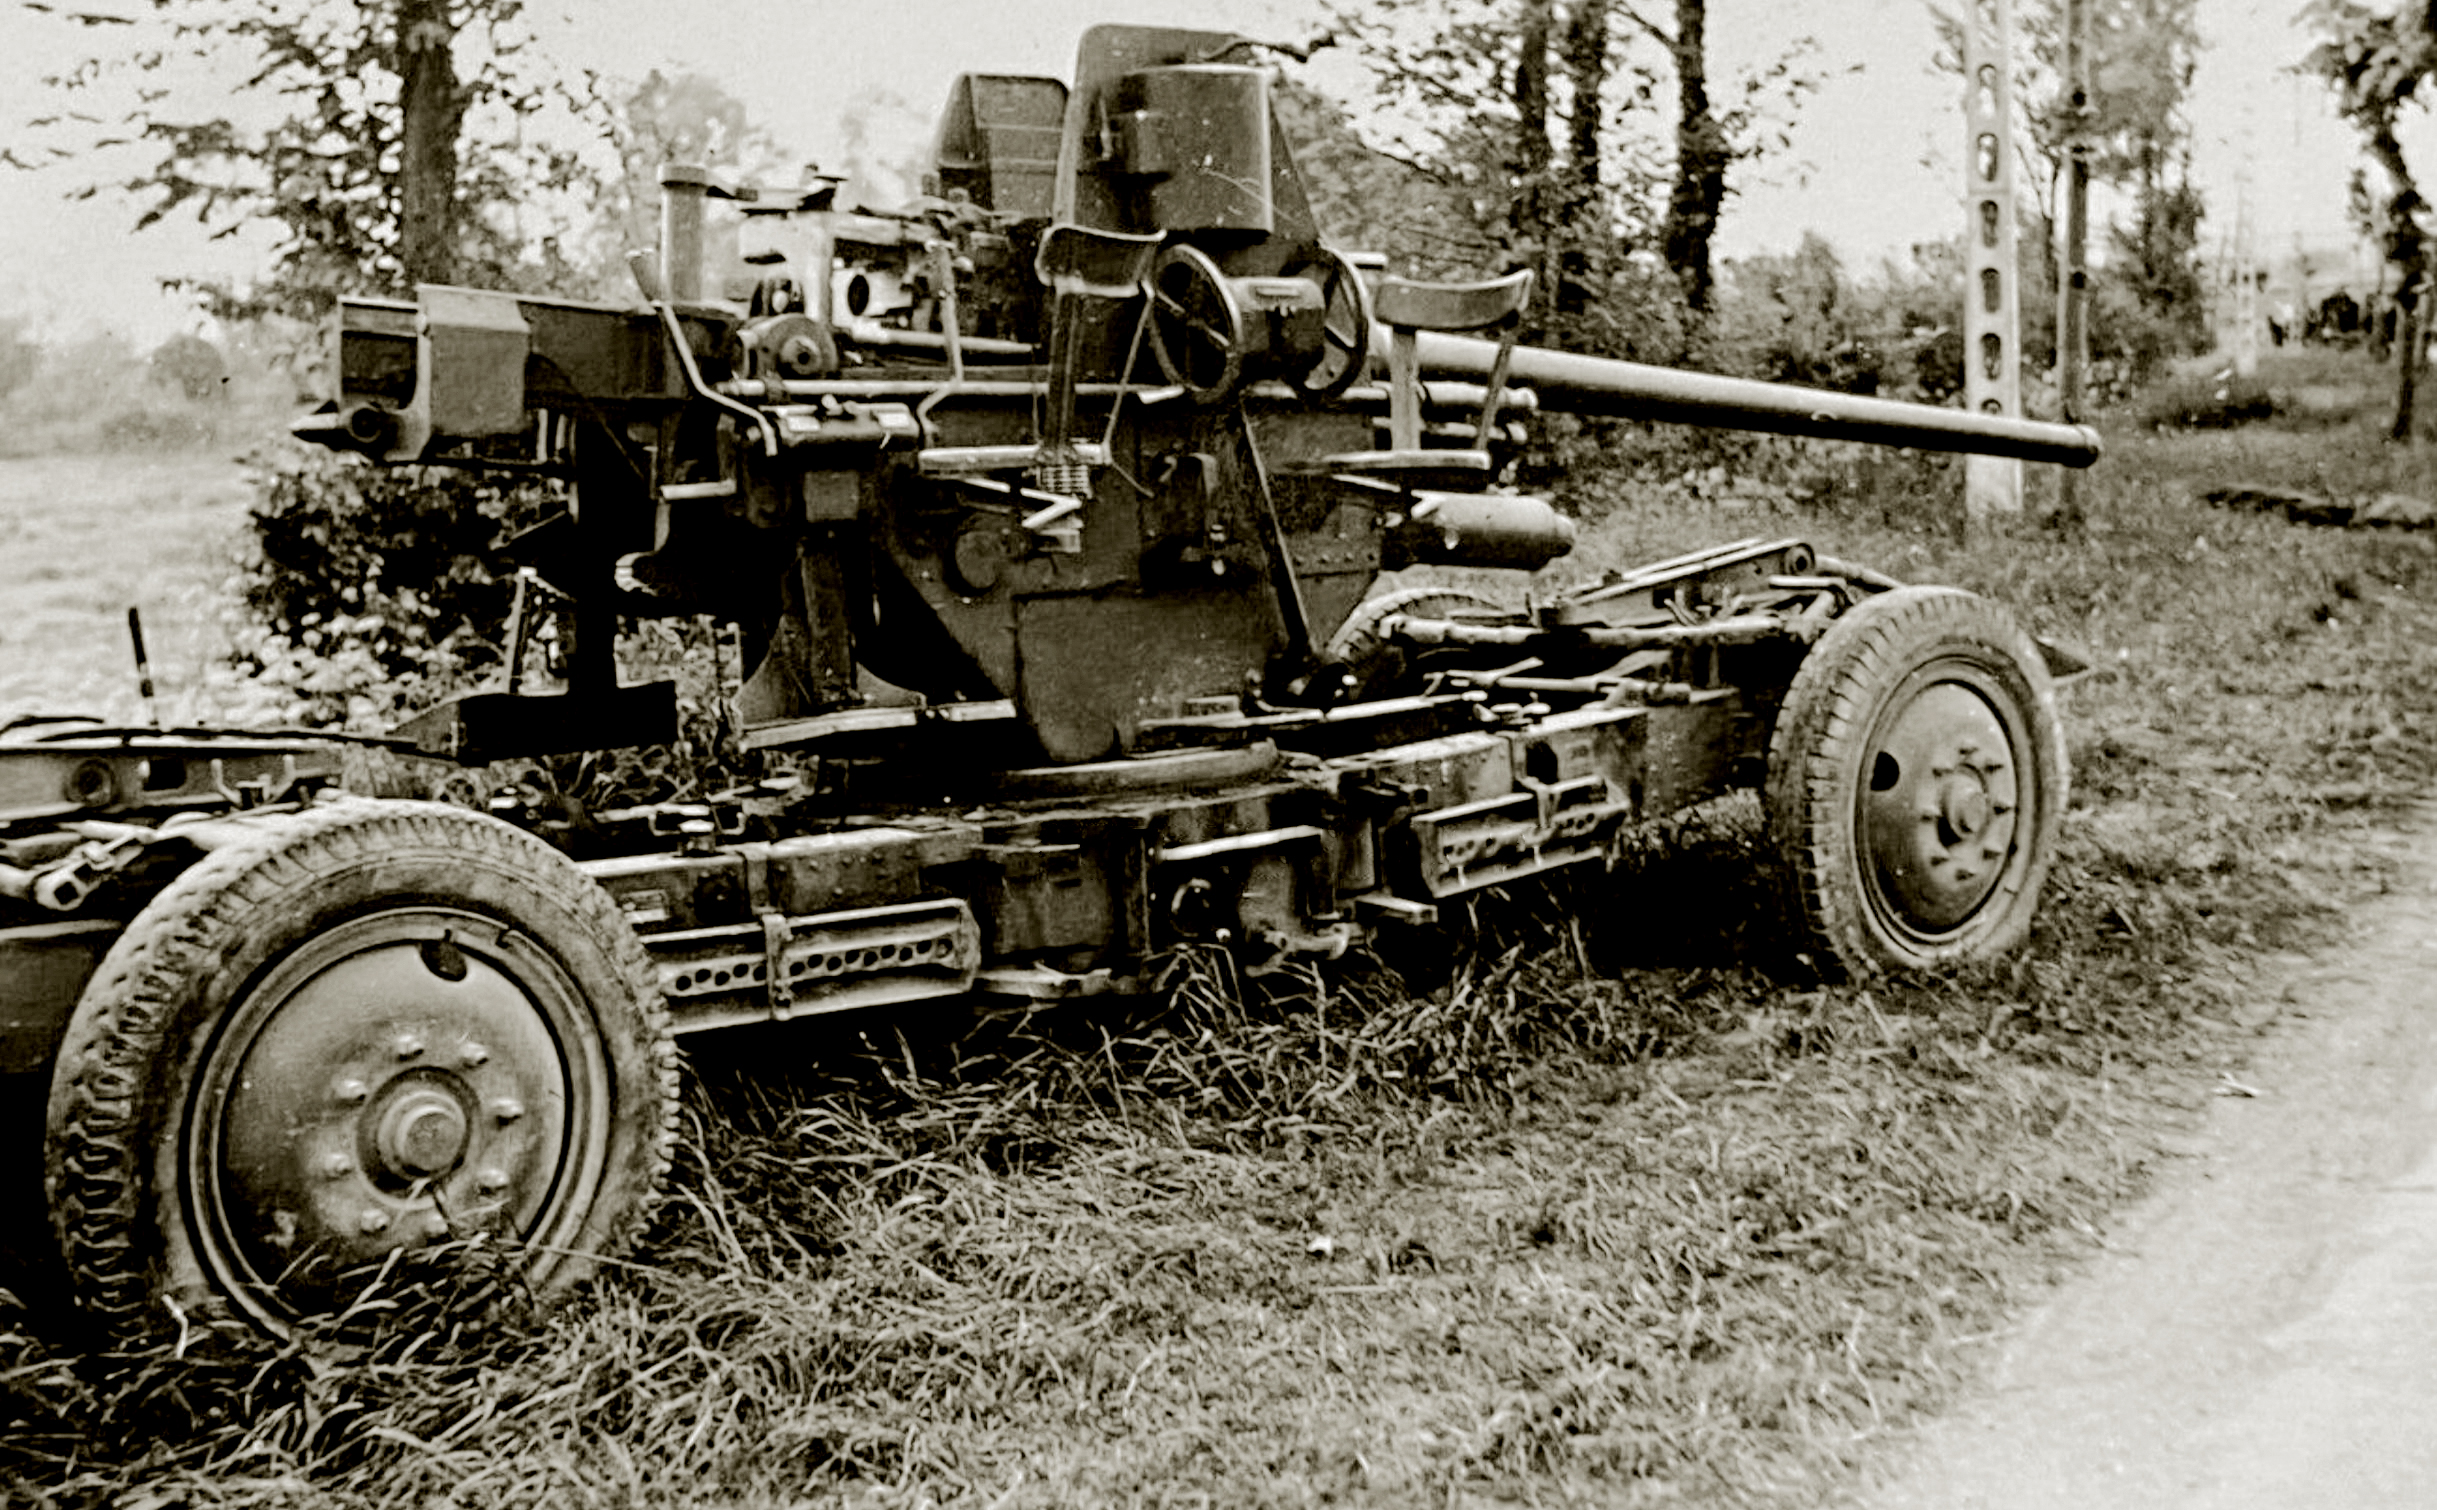 French flak gun captured by 10 Panzer division Battle of France May 1940 eBay 01